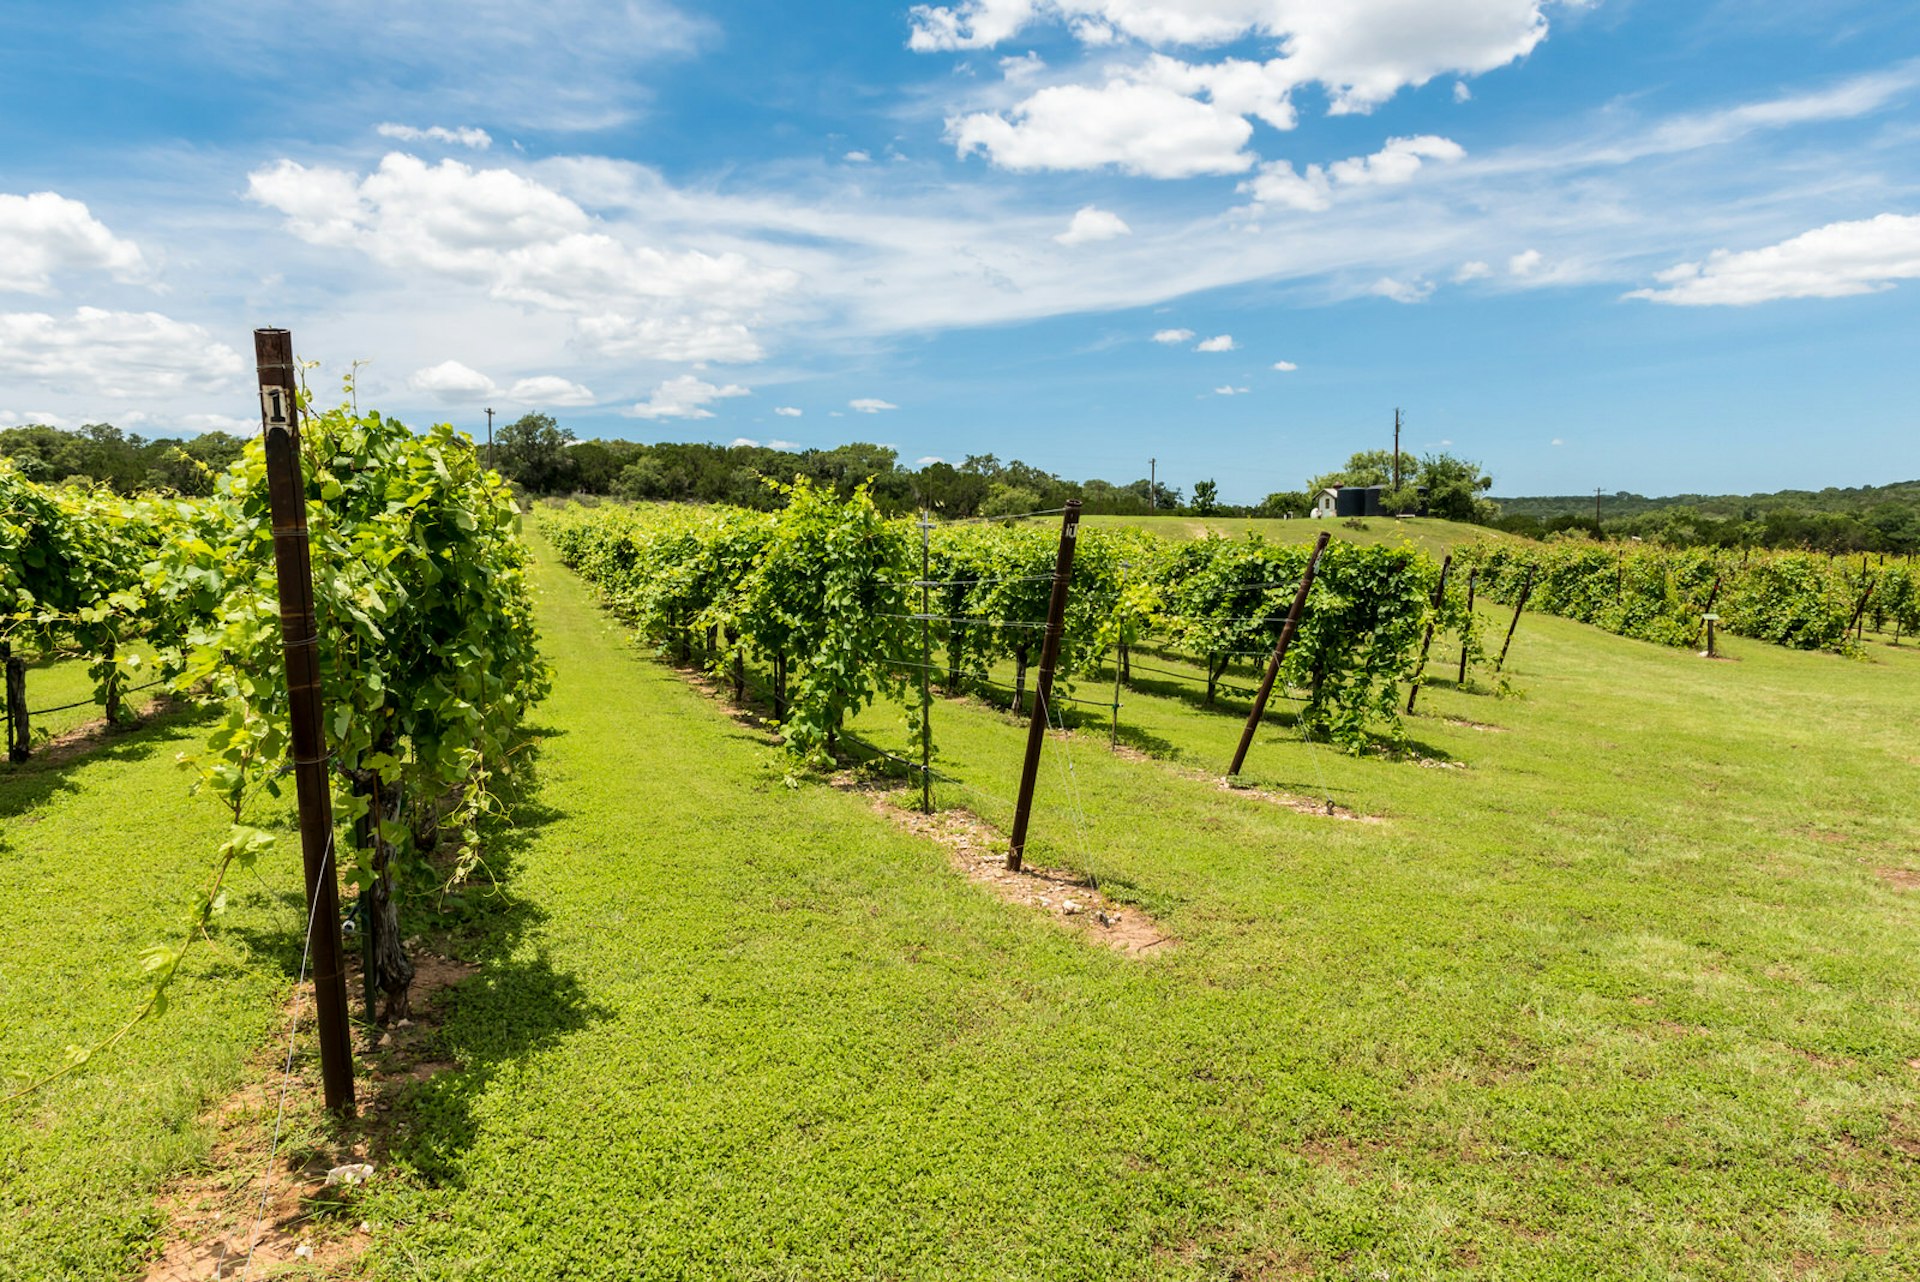 At over 9 million acres, the Hill Country American Viticultural Area (AVA) is the second largest wine region in the USA © Terri Butler Photography / Shutterstock